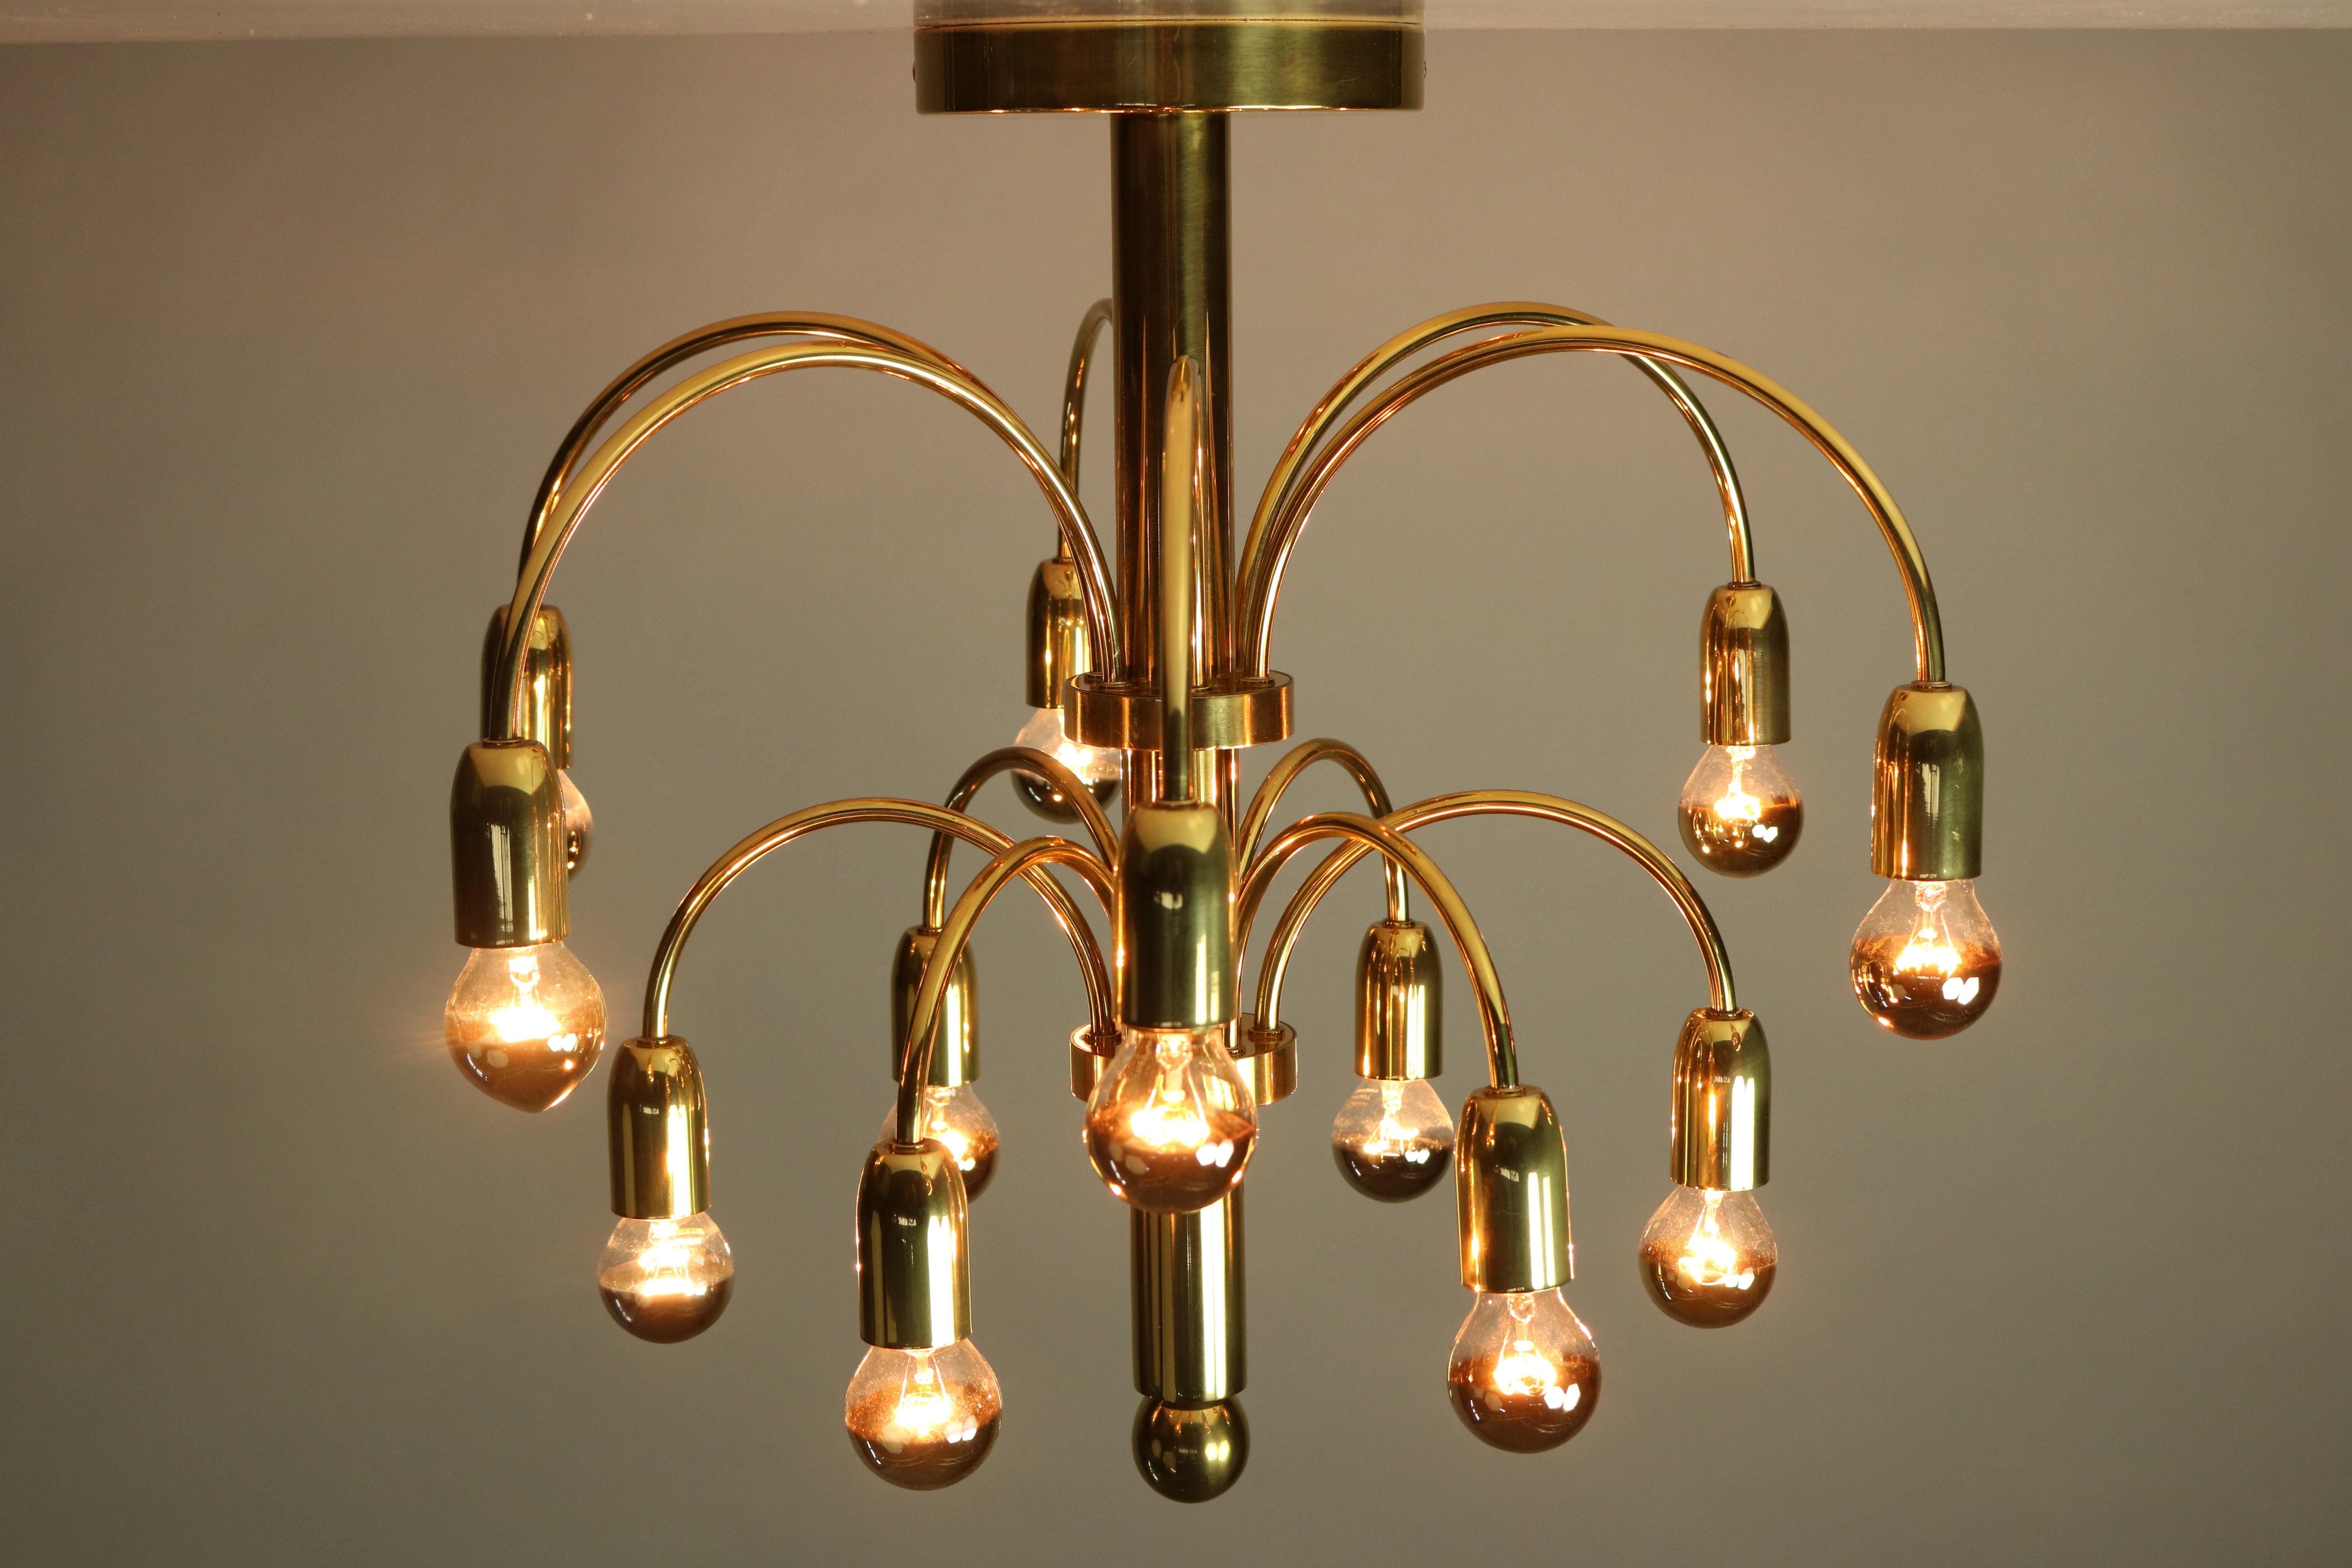 1970s design chandelier
high quality made of brass with 12 arms and 12 lights
you need small Edison screw bulbs to operate
not included in this offer, the wiring is renewed and 110 - 250 V safe
Measures without bulbs:
diameter 20'', height